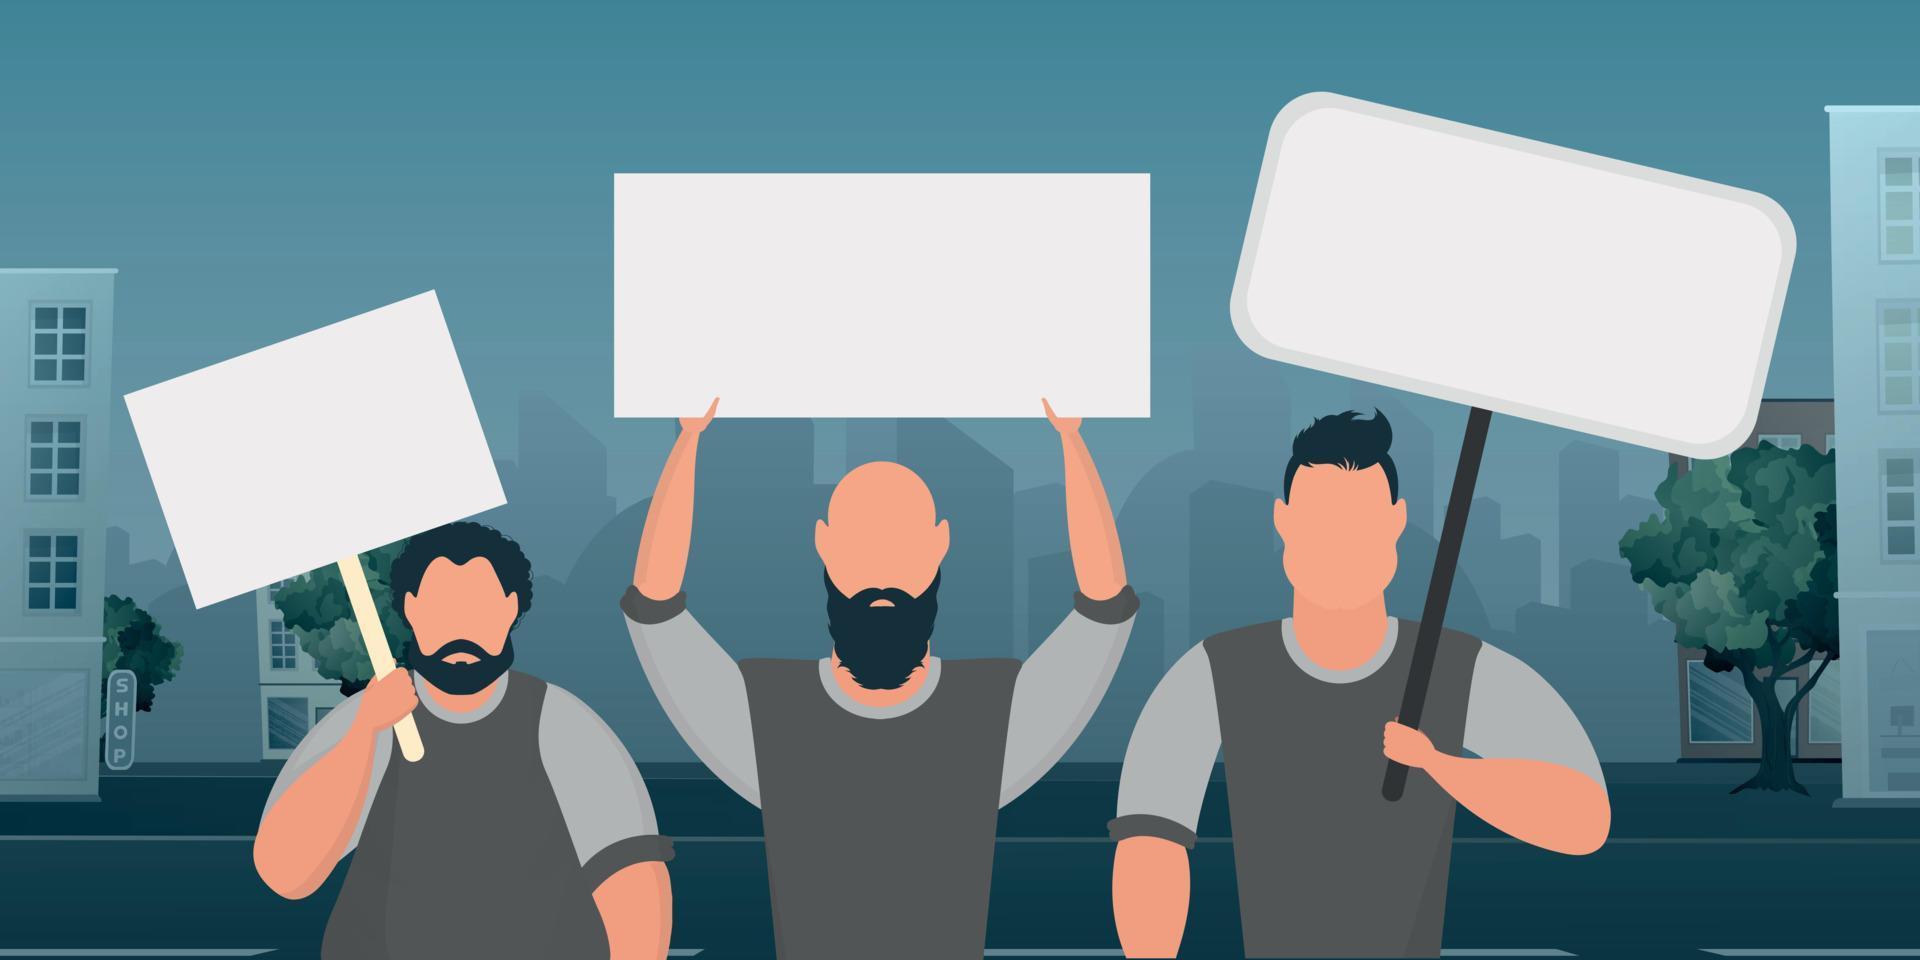 A crowd of guys with banners in their hands are protesting. Cartoon style. Vector illustration.